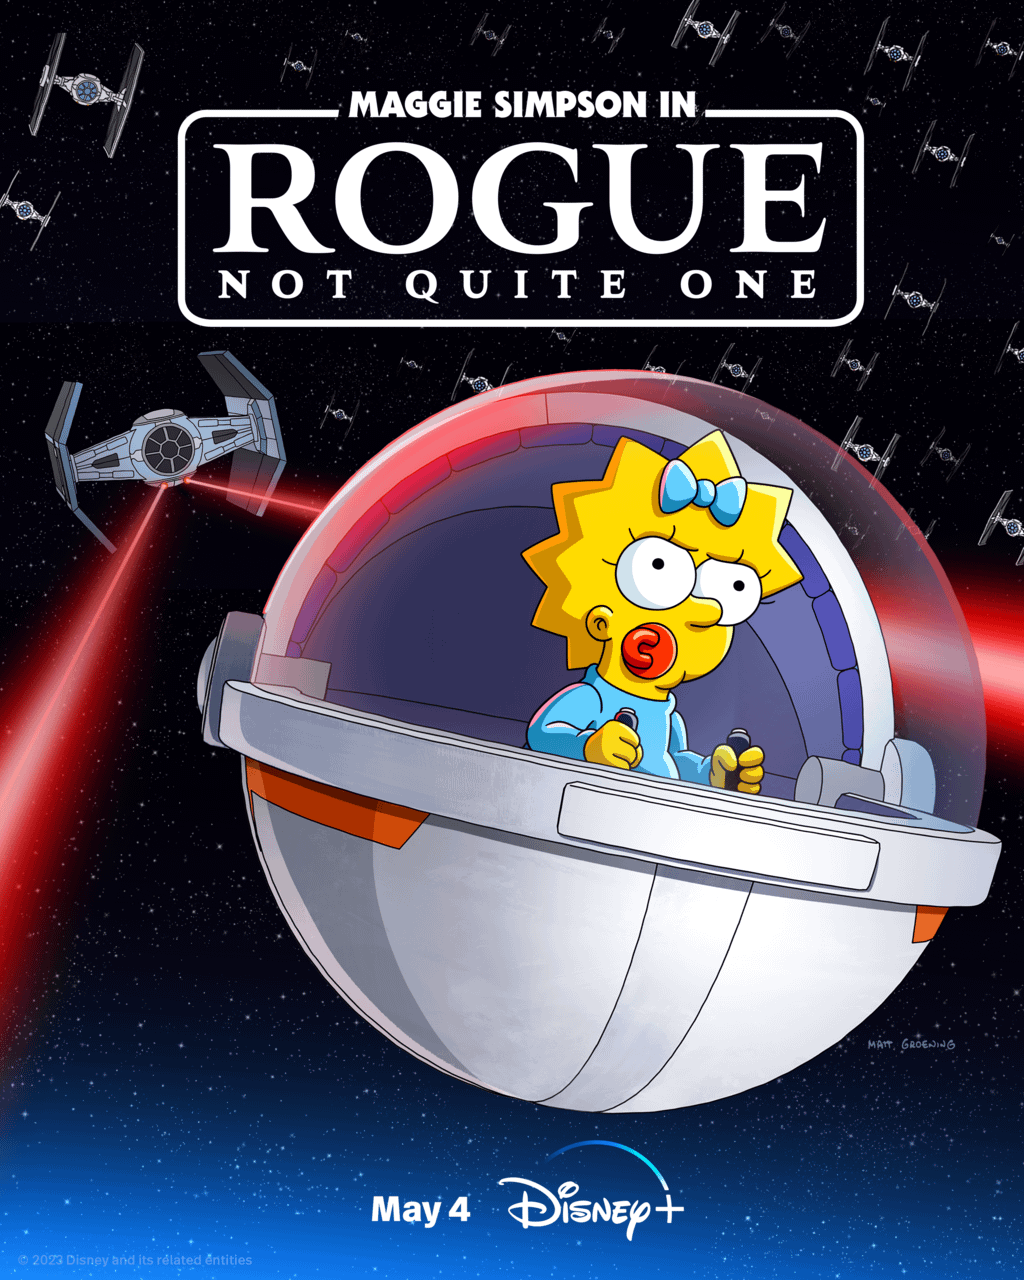 The Simpsons And Star Wars Collide In Latest Disney Plus Short, Rogue Not Quite One